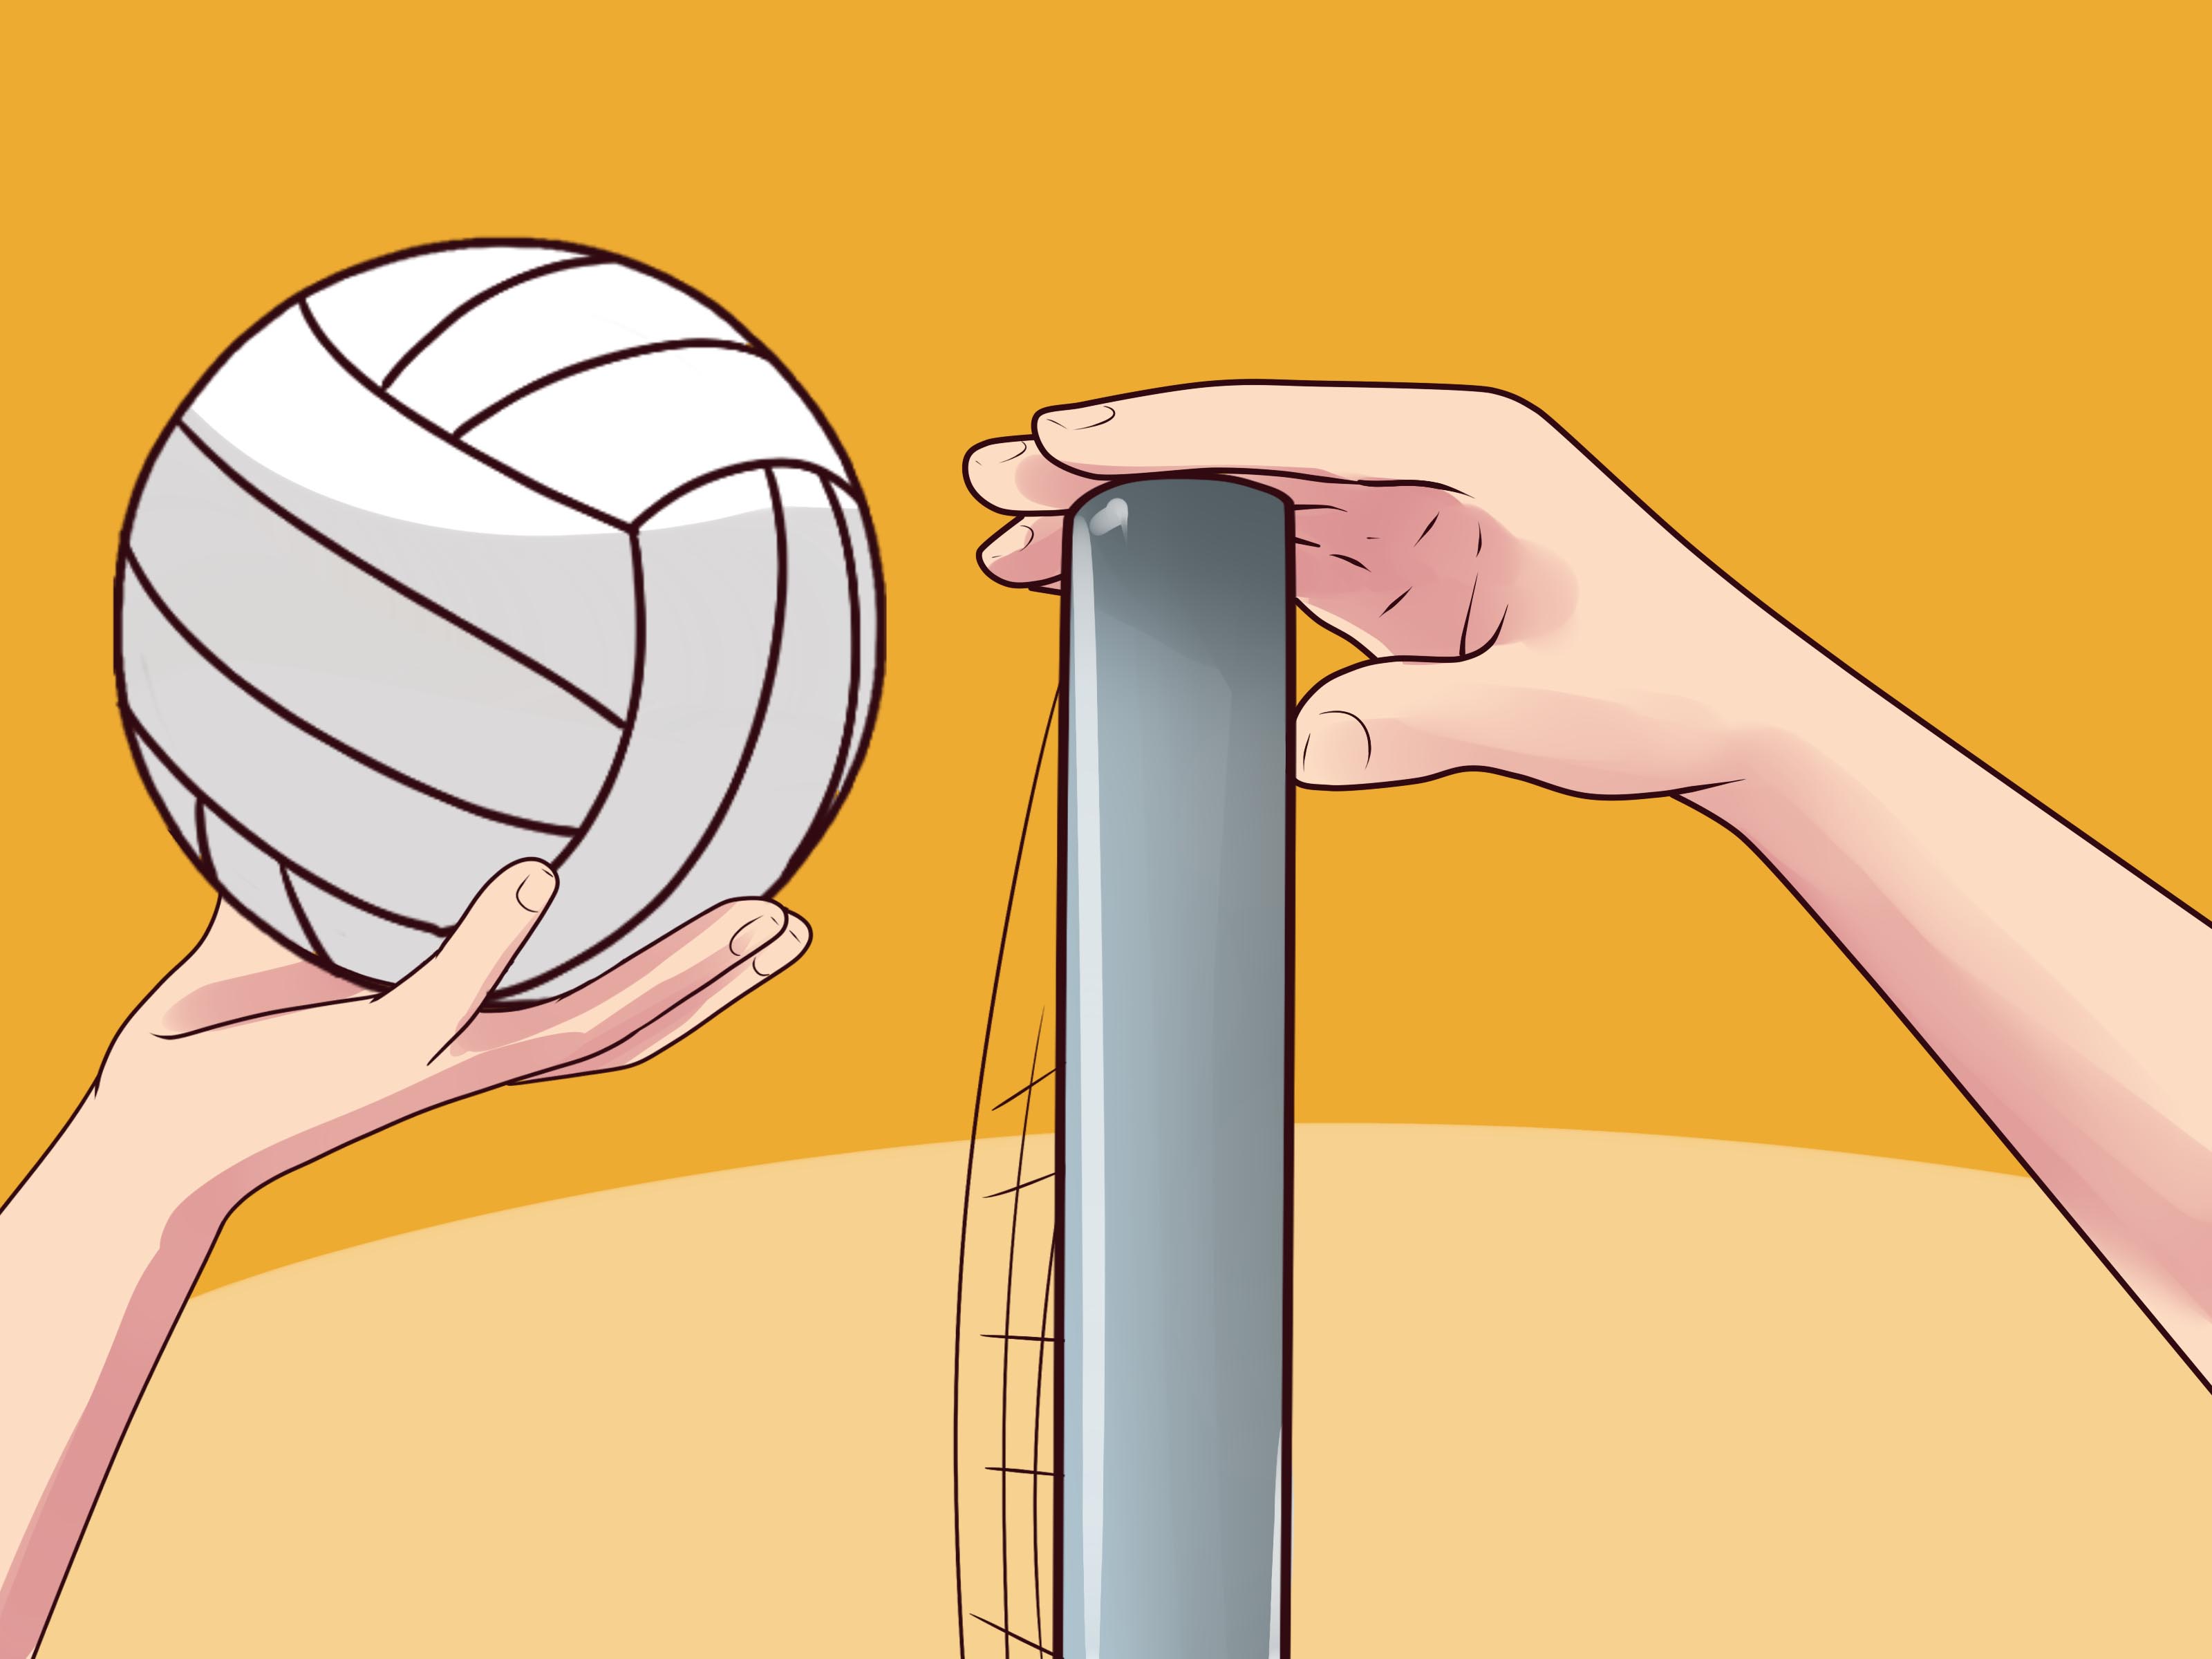 Image Titled Block Volleyball Step - Volleyball Blocking Technique Wikihow Step7 - HD Wallpaper 